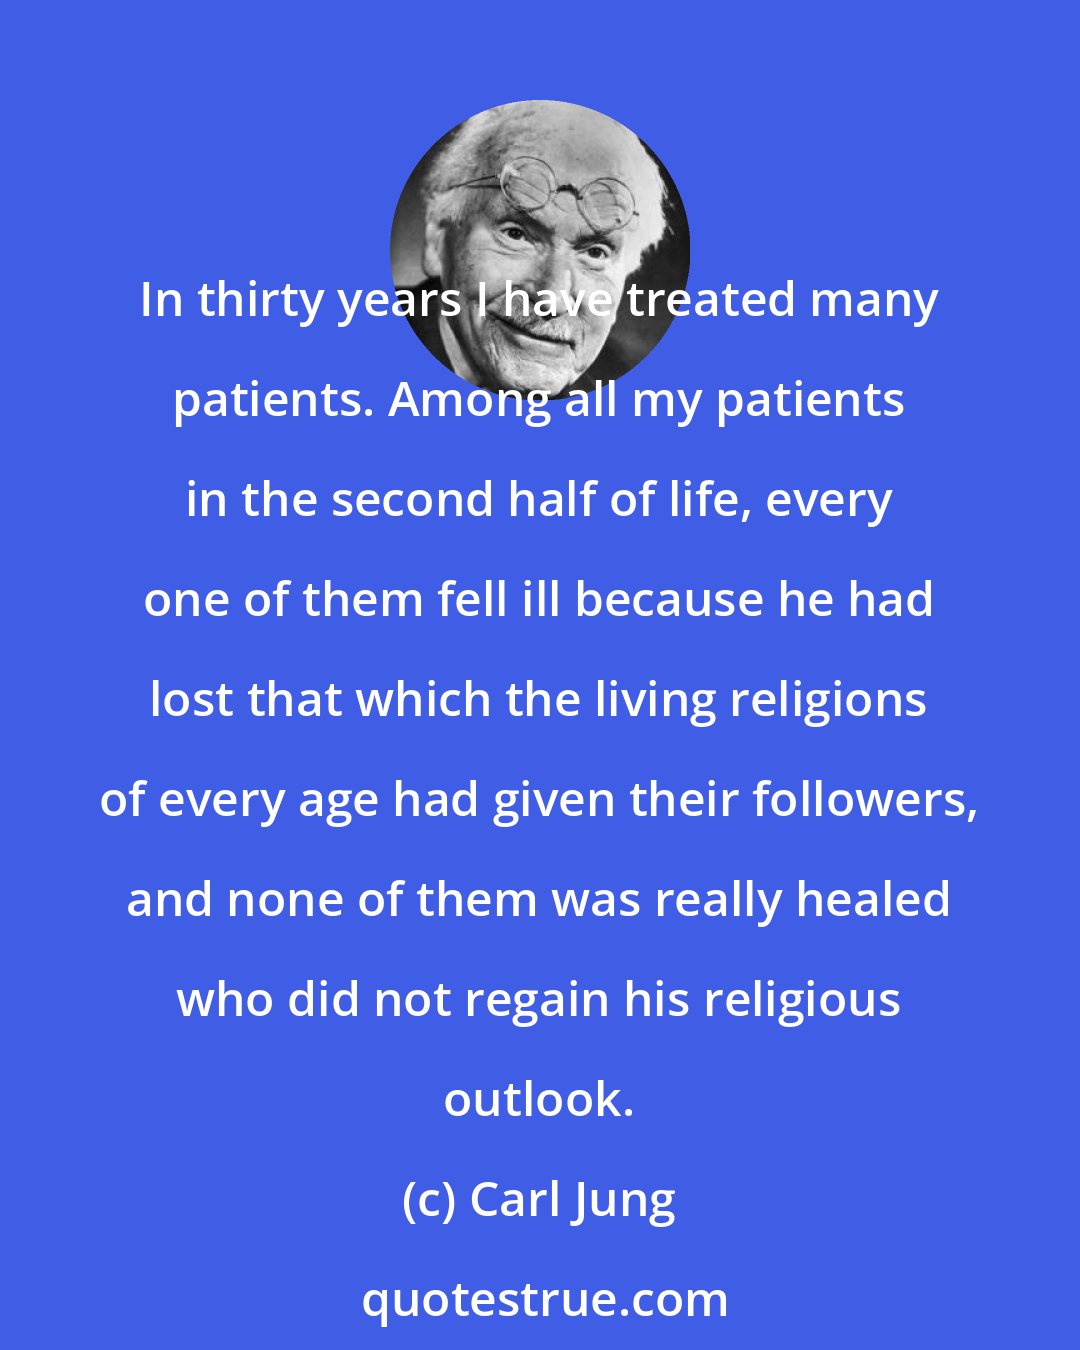 Carl Jung: In thirty years I have treated many patients. Among all my patients in the second half of life, every one of them fell ill because he had lost that which the living religions of every age had given their followers, and none of them was really healed who did not regain his religious outlook.